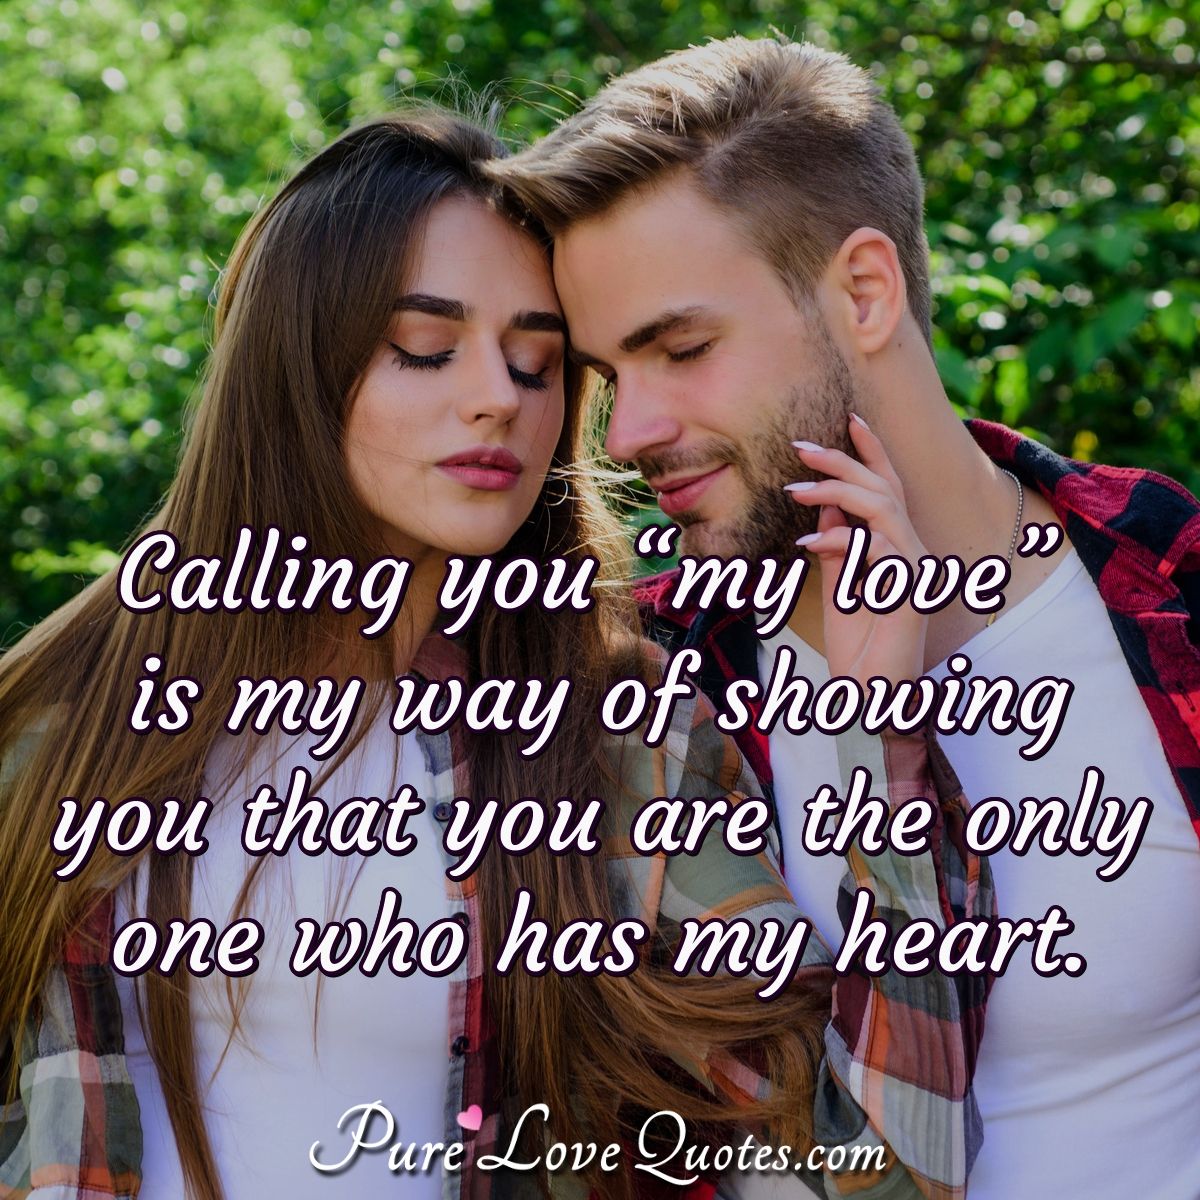 https://www.purelovequotes.com/images/quotes/1200/calling-you-my-love-is-my-way.jpg?v=1